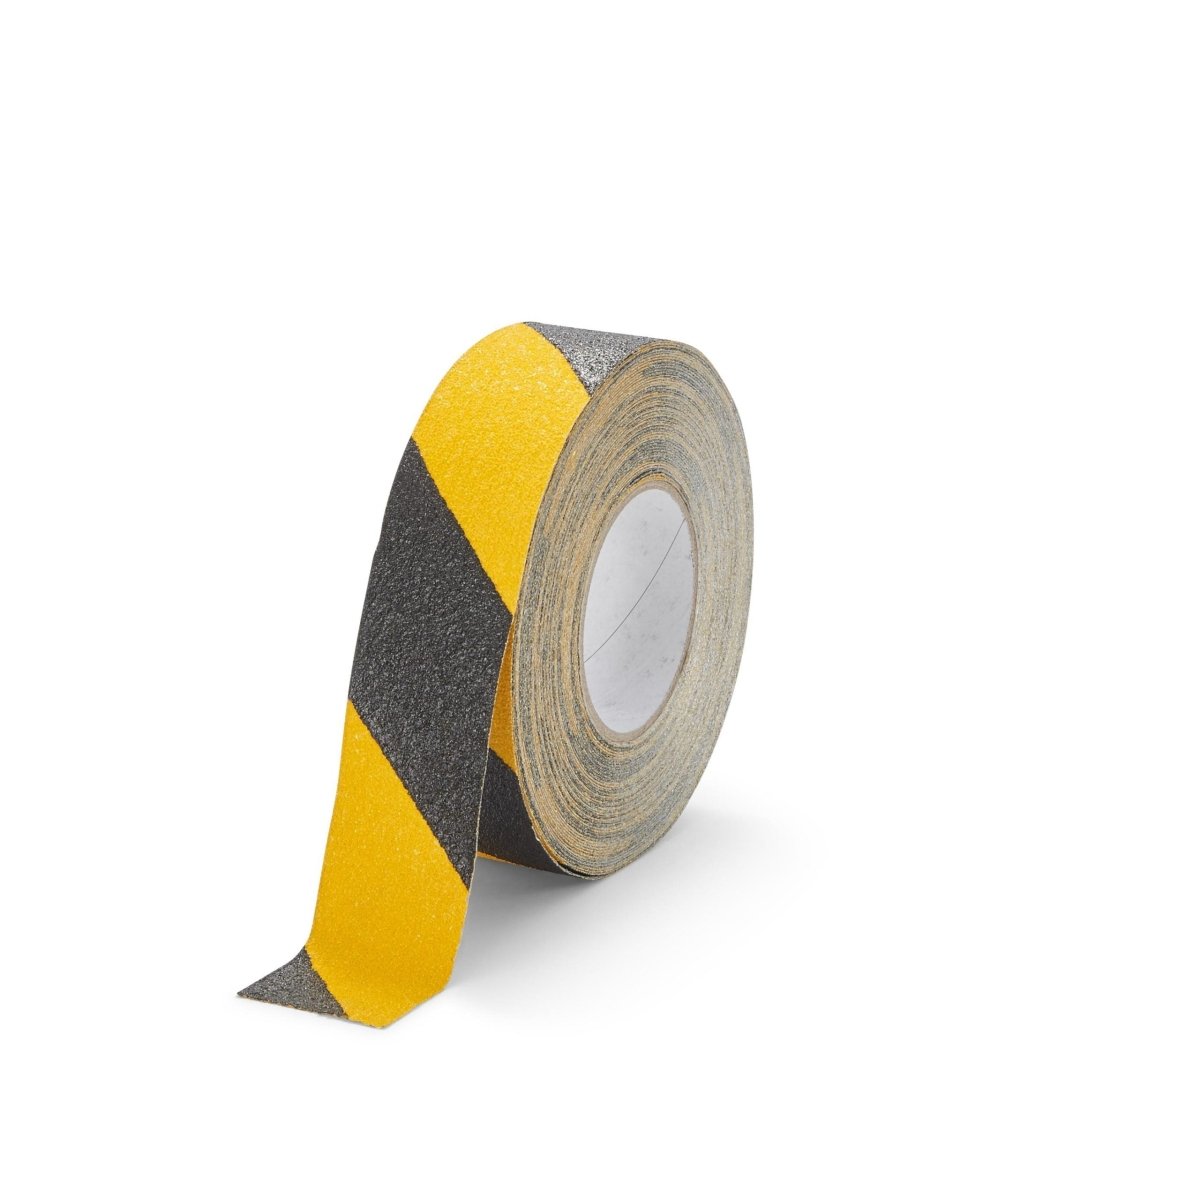 Hazard Conformable Traction Grade Anti Slip Tape Rolls - Slips Away - H3406D-Black-Yellow-Conformable-Safety-Grip-50mm -